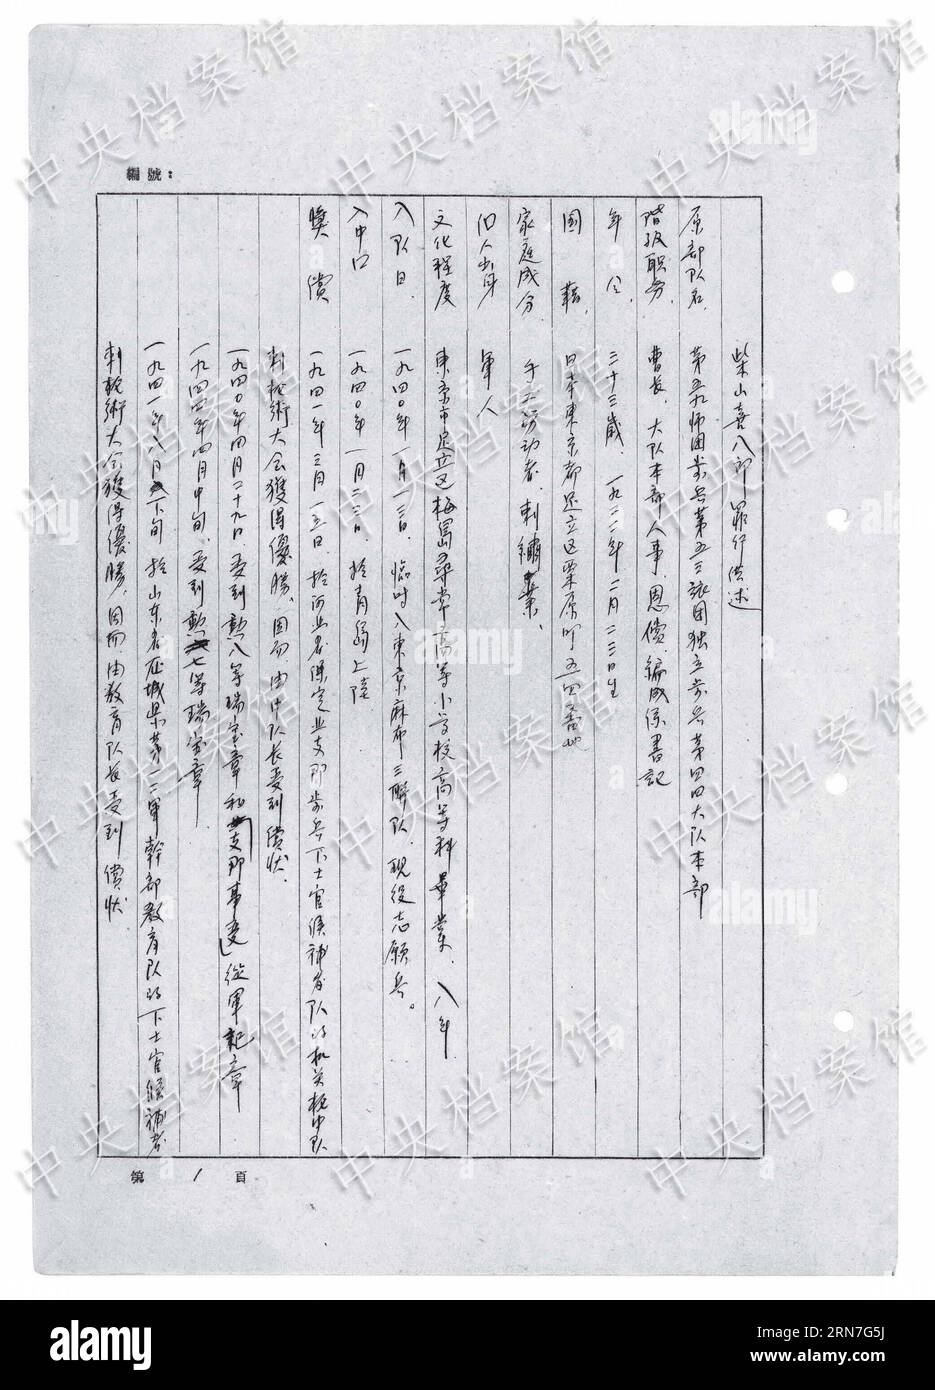 (150905) -- BEIJING, Sept. 5, 2015 () -- Photo released on Sept. 5, 2015 by the State Archives Administration of China on its website shows the Chinese translation of an excerpt from Japanese war criminal Kihachiro Sibayama s written confession. Born in Japan in 1922, Sibayama joined the Japanese invasion in 1940 and was captured in August 1945. According to the confession by Kihachiro Sibayama, in May 1940 in Shandong Province, the Japanese soldier shot 30 bullets at Chinese people of about 40 to 50 years old who were carrying shoulder poles and walking, in order to test the effectiveness of Stock Photo